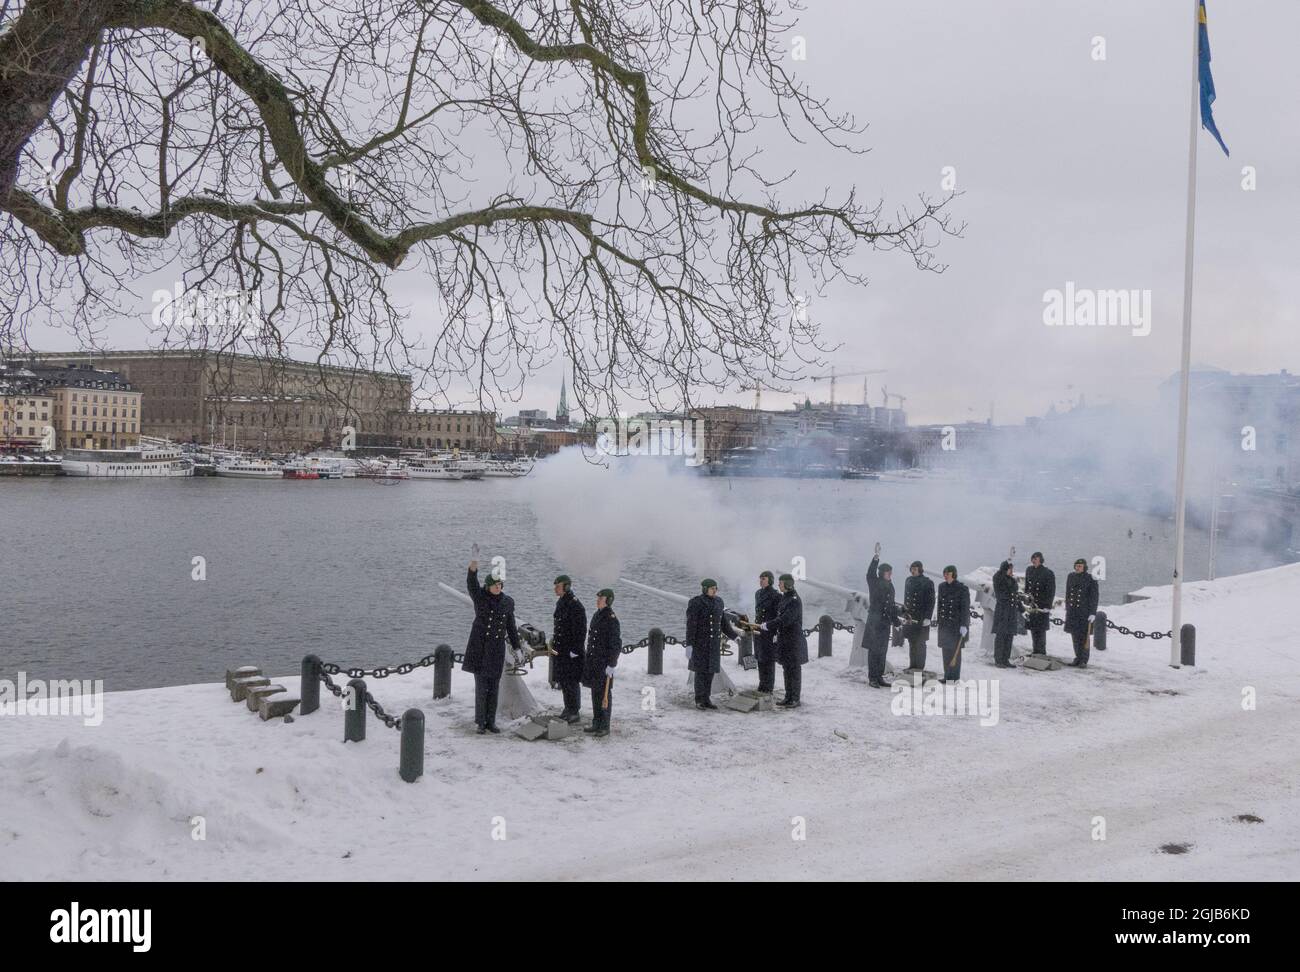 STOCKHOLM 2018-03-09 Soldiers from the Amphibious Corps honored the newborn daughter of Princess Madeleine and Chris O'ineill with a salute near the Royal palace in Stockholm Sweden on Friday. Royal Palace in the rear Foto Leif Blom / TT kod 50080  Stock Photo